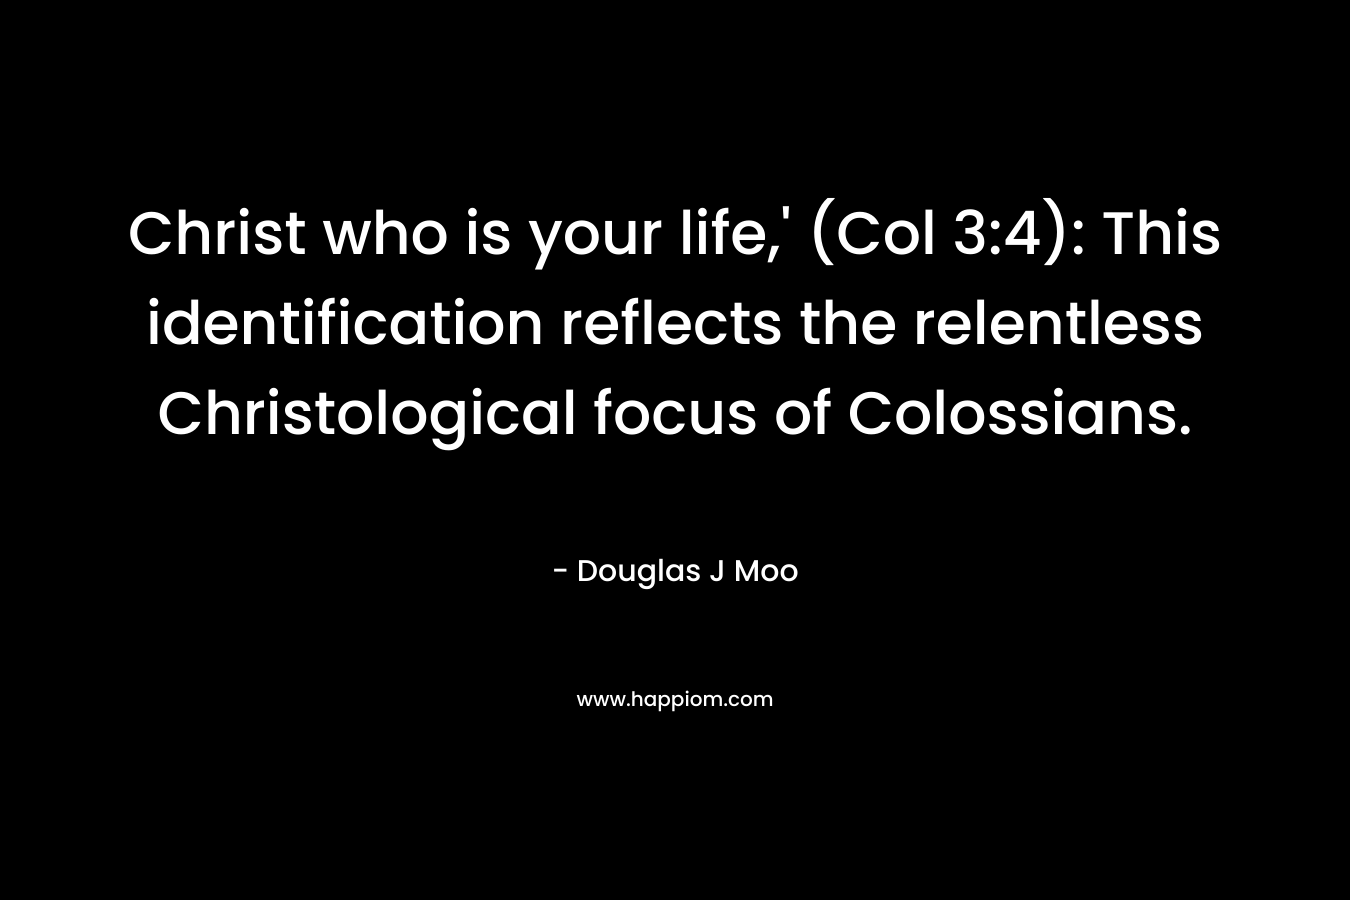 Christ who is your life,' (Col 3:4): This identification reflects the relentless Christological focus of Colossians.